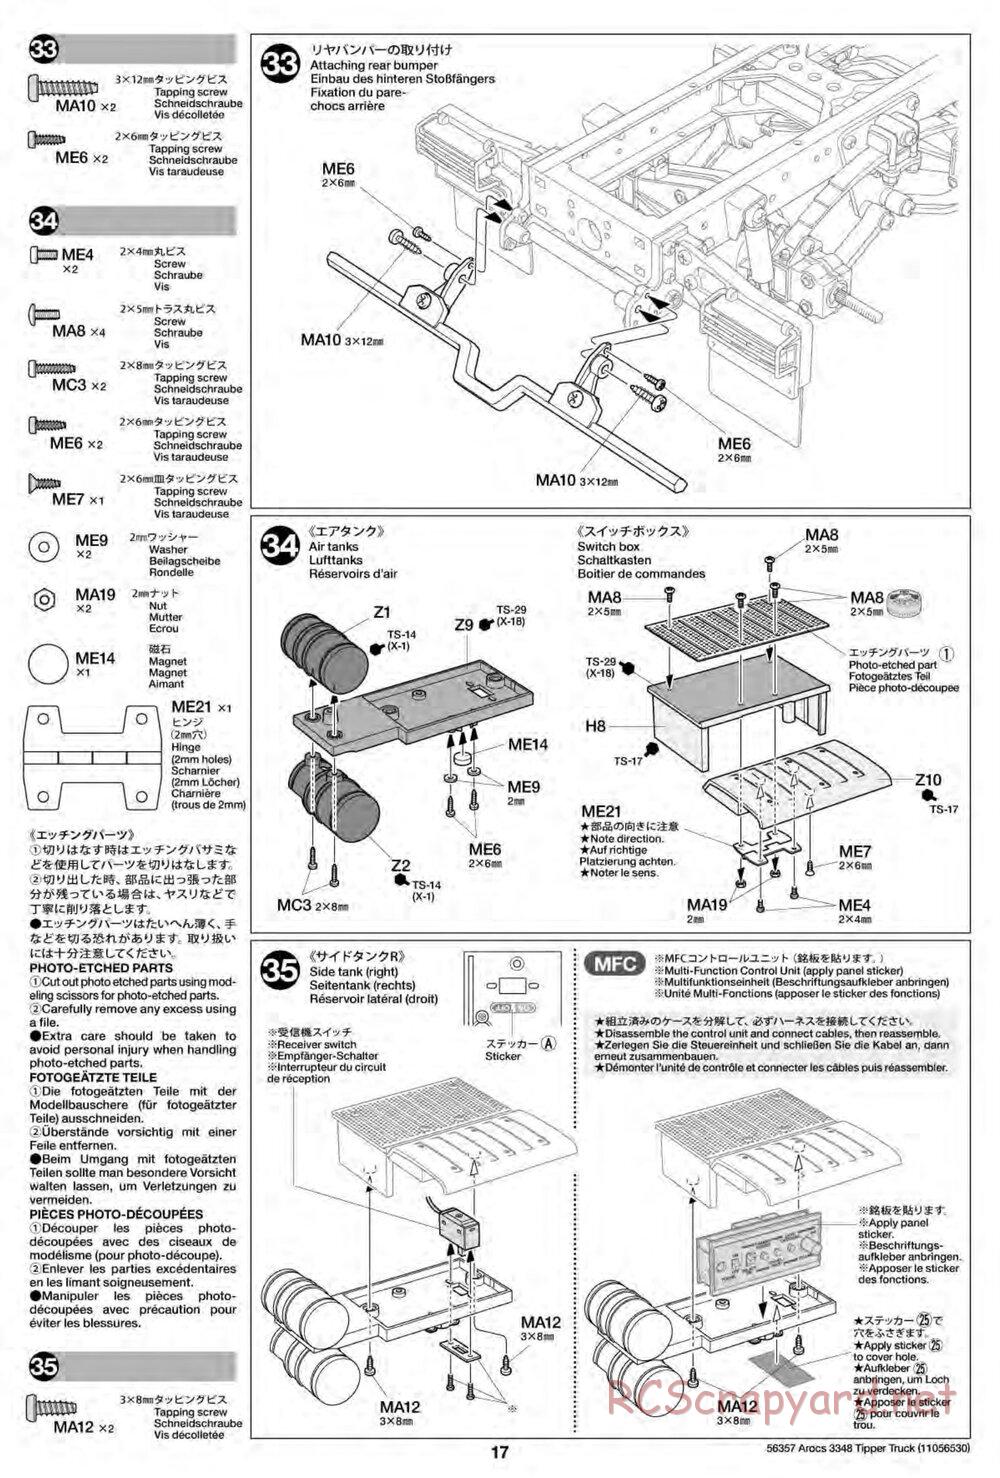 Tamiya - Mercedes-Benz Arocs 3348 6x4 Tipper Truck Chassis - Manual - Page 17